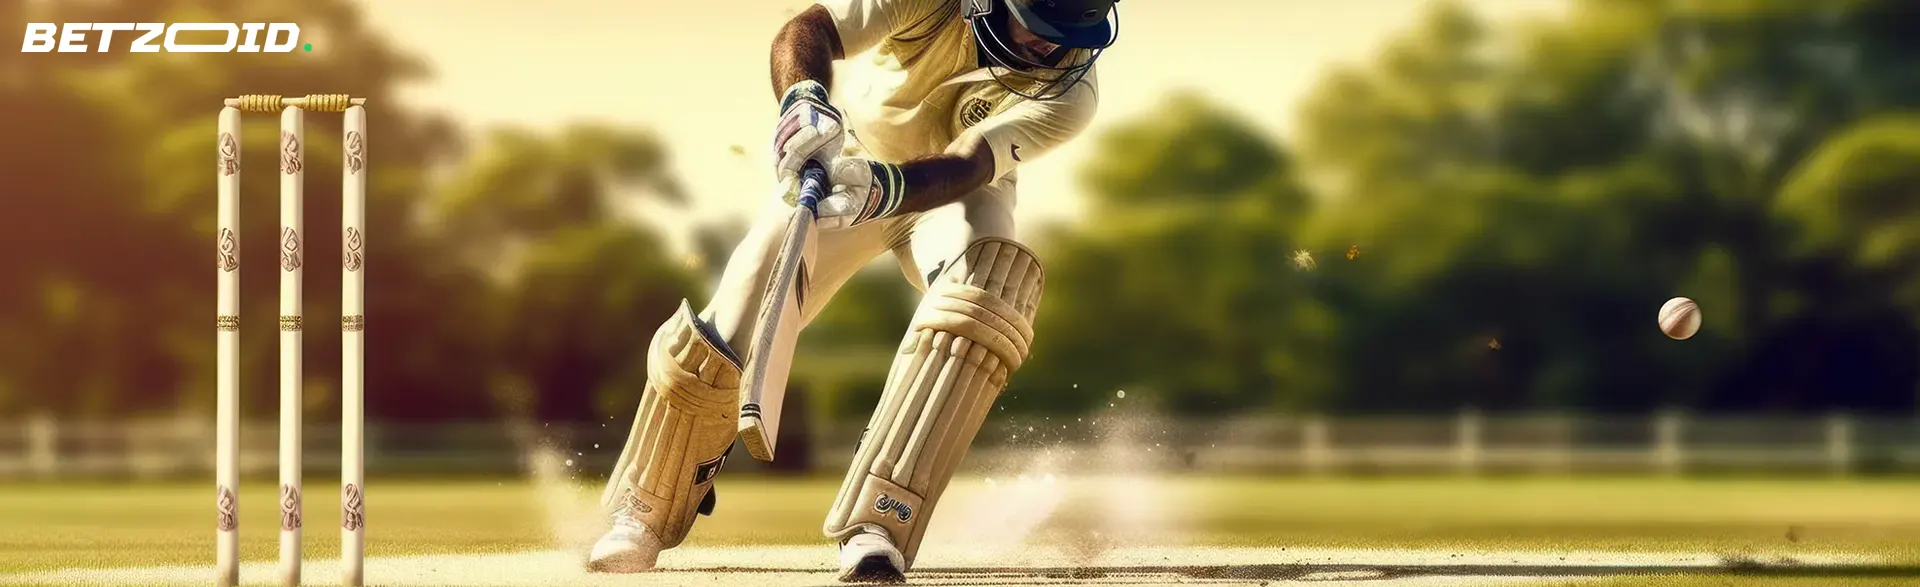 A cricket player in action with a bat, on a green field with stumps, representing cricket betting apps in Canada.